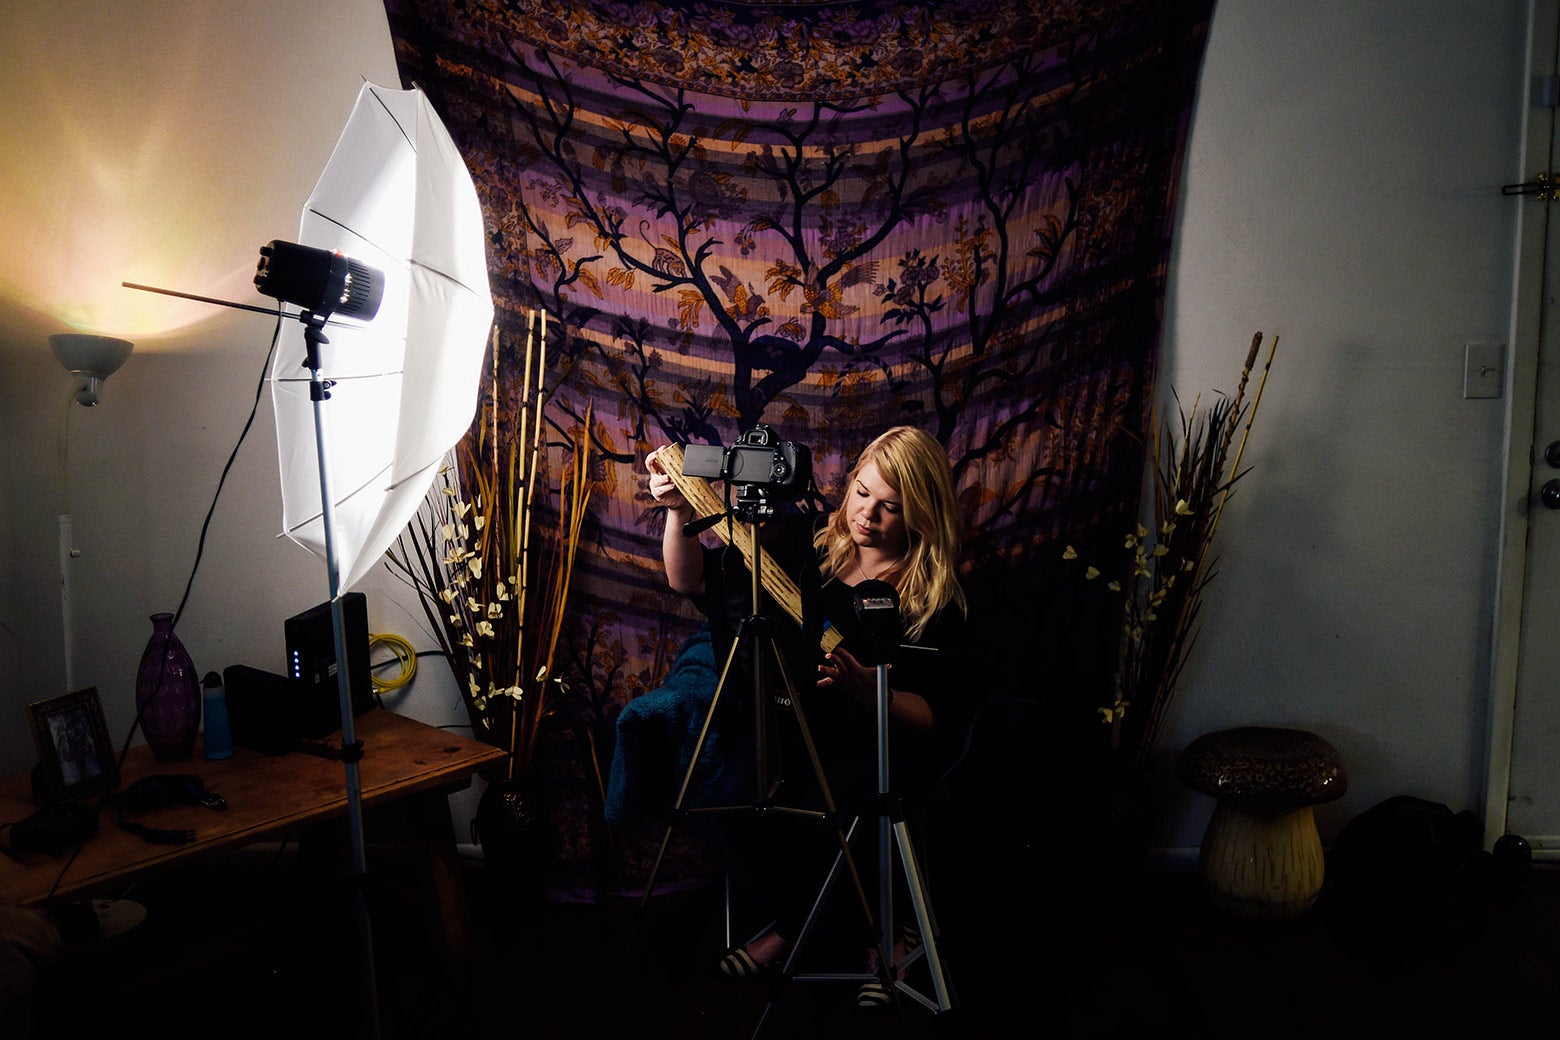 A woman holds a rainstick with a camera and lighting gear pointed toward her.